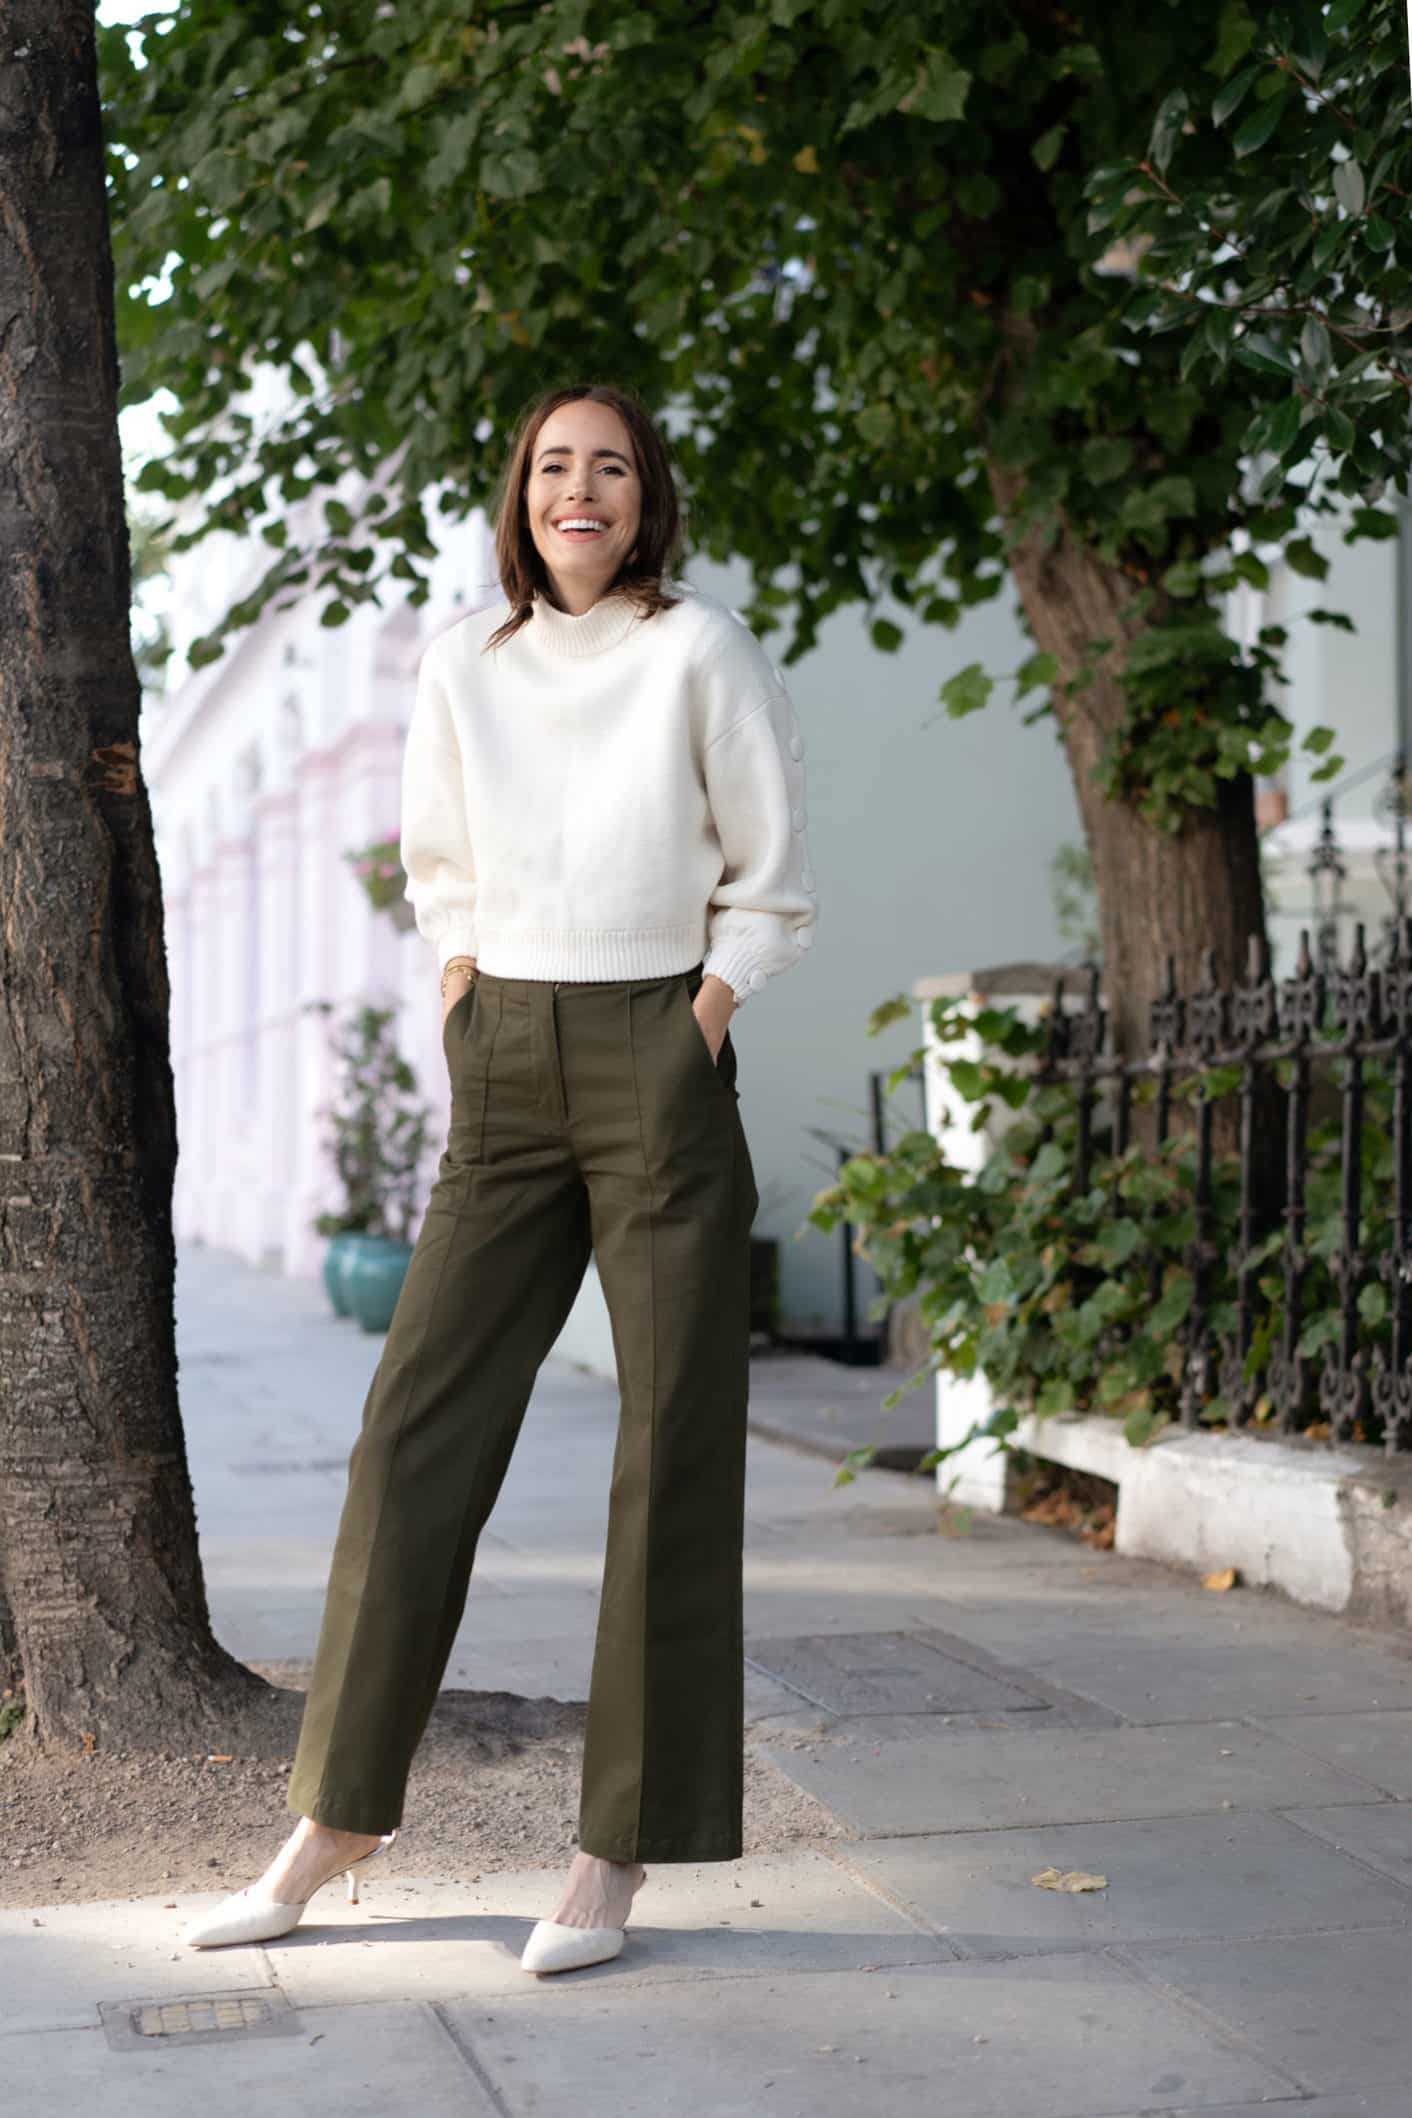 How To Make Your Wardrobe More Sustainable - Front Roe by Louise Roe